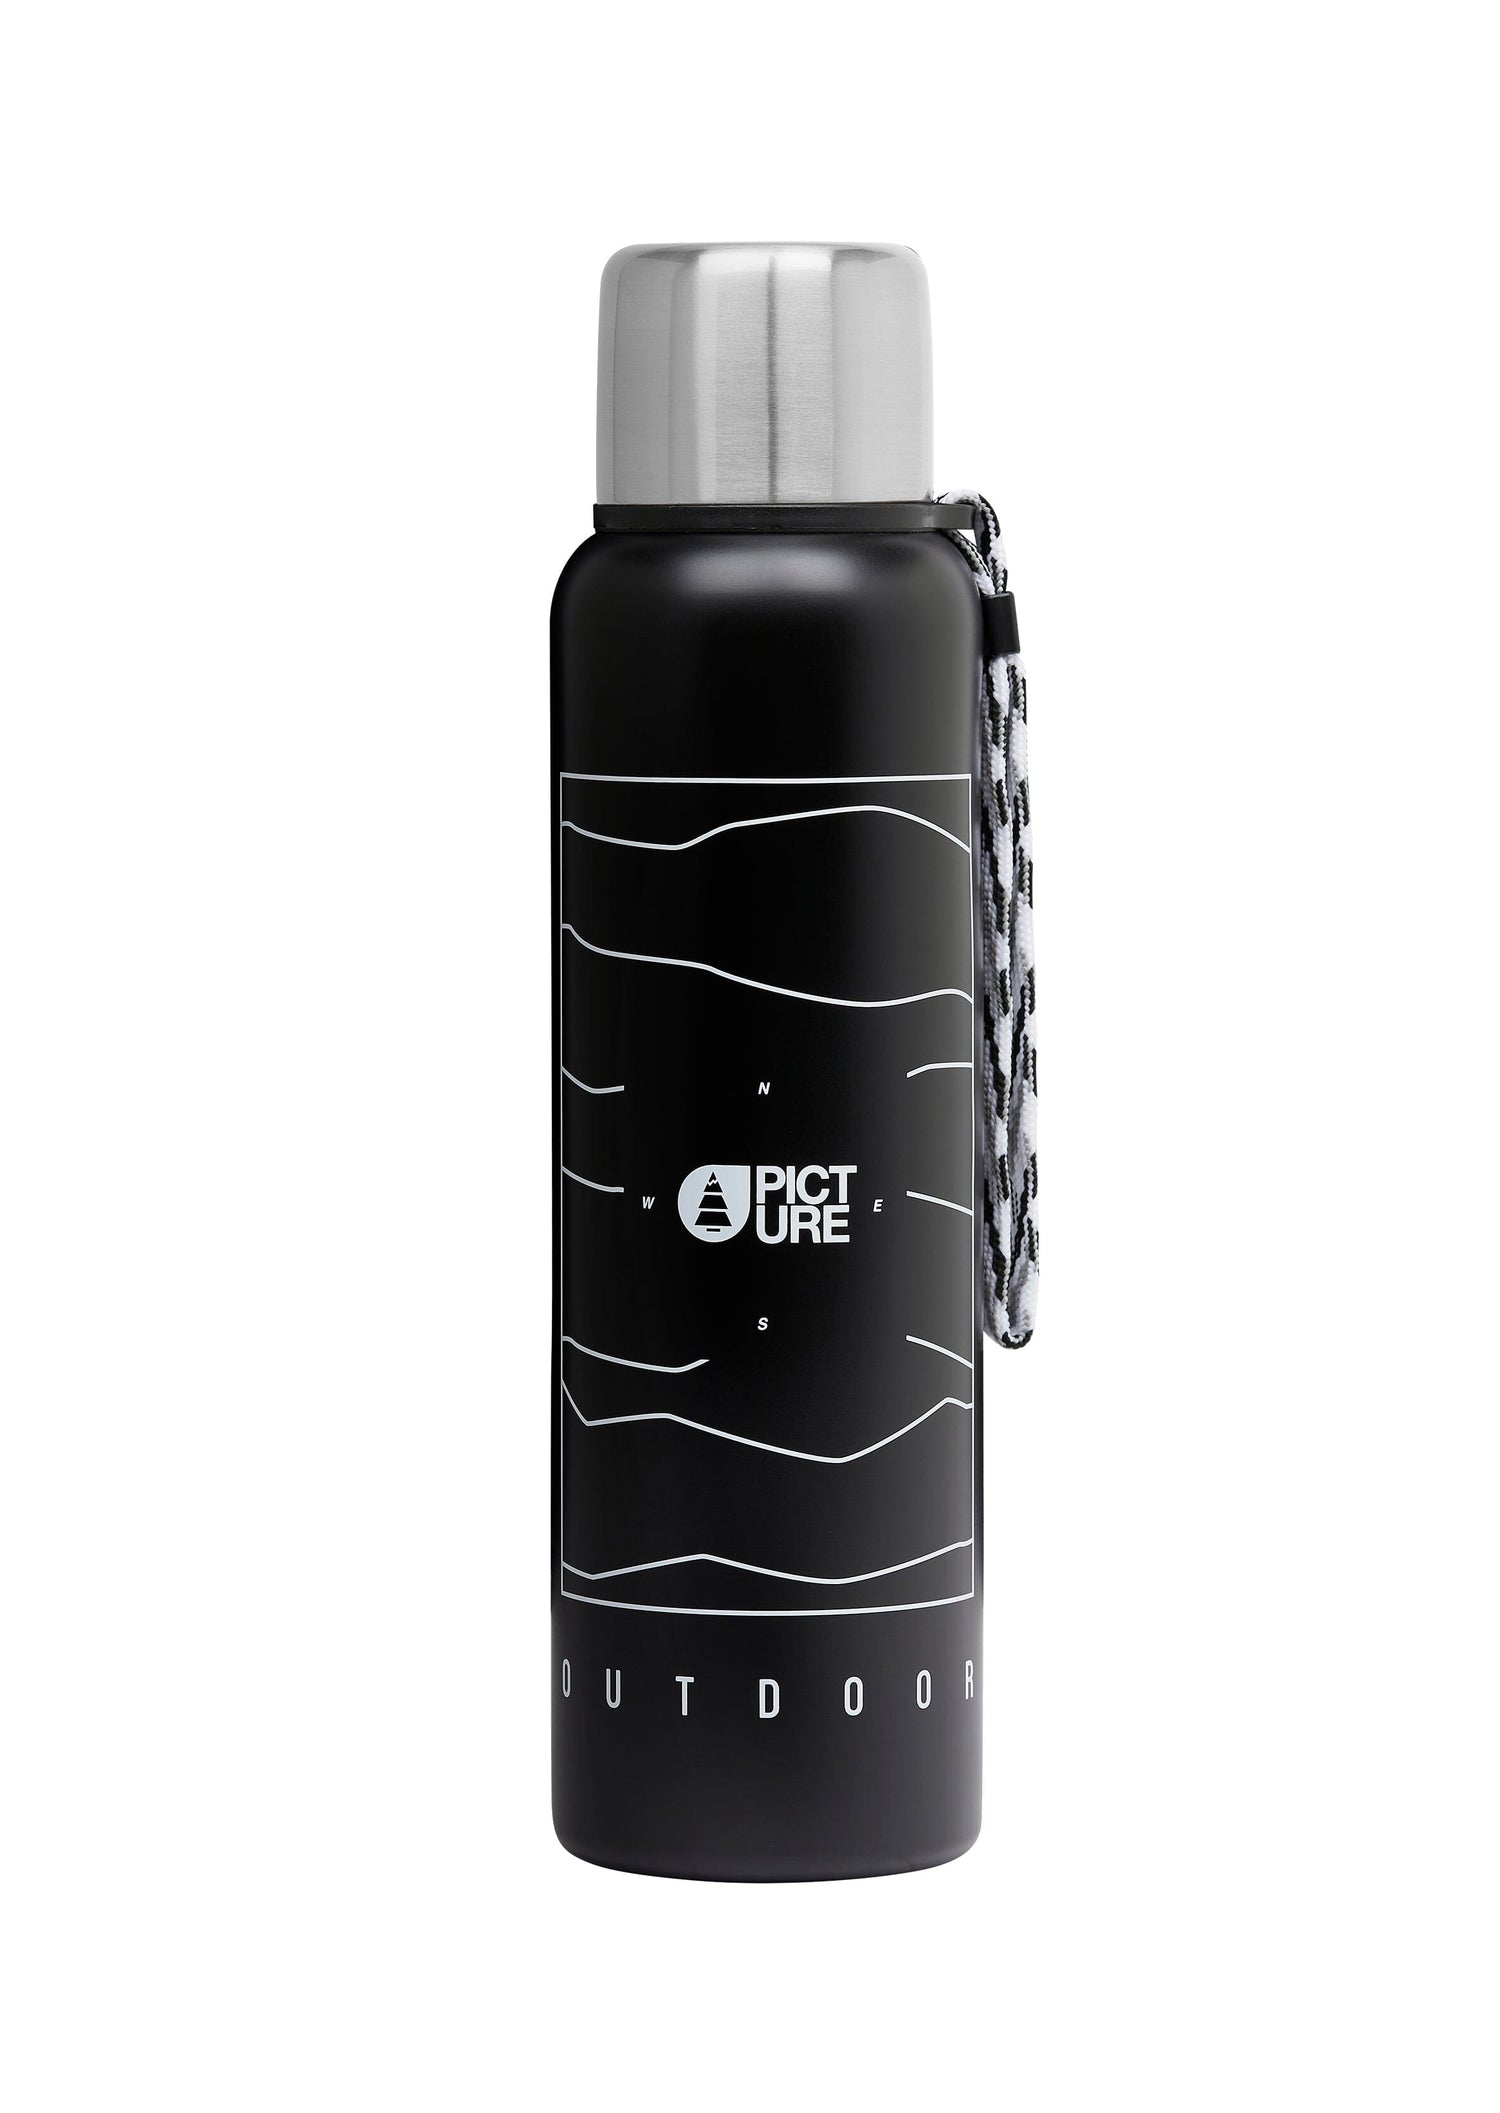 Picture Organic - Campoi Vacuum Thermos Bottle - BPA free Stainless Steel - Weekendbee - sustainable sportswear